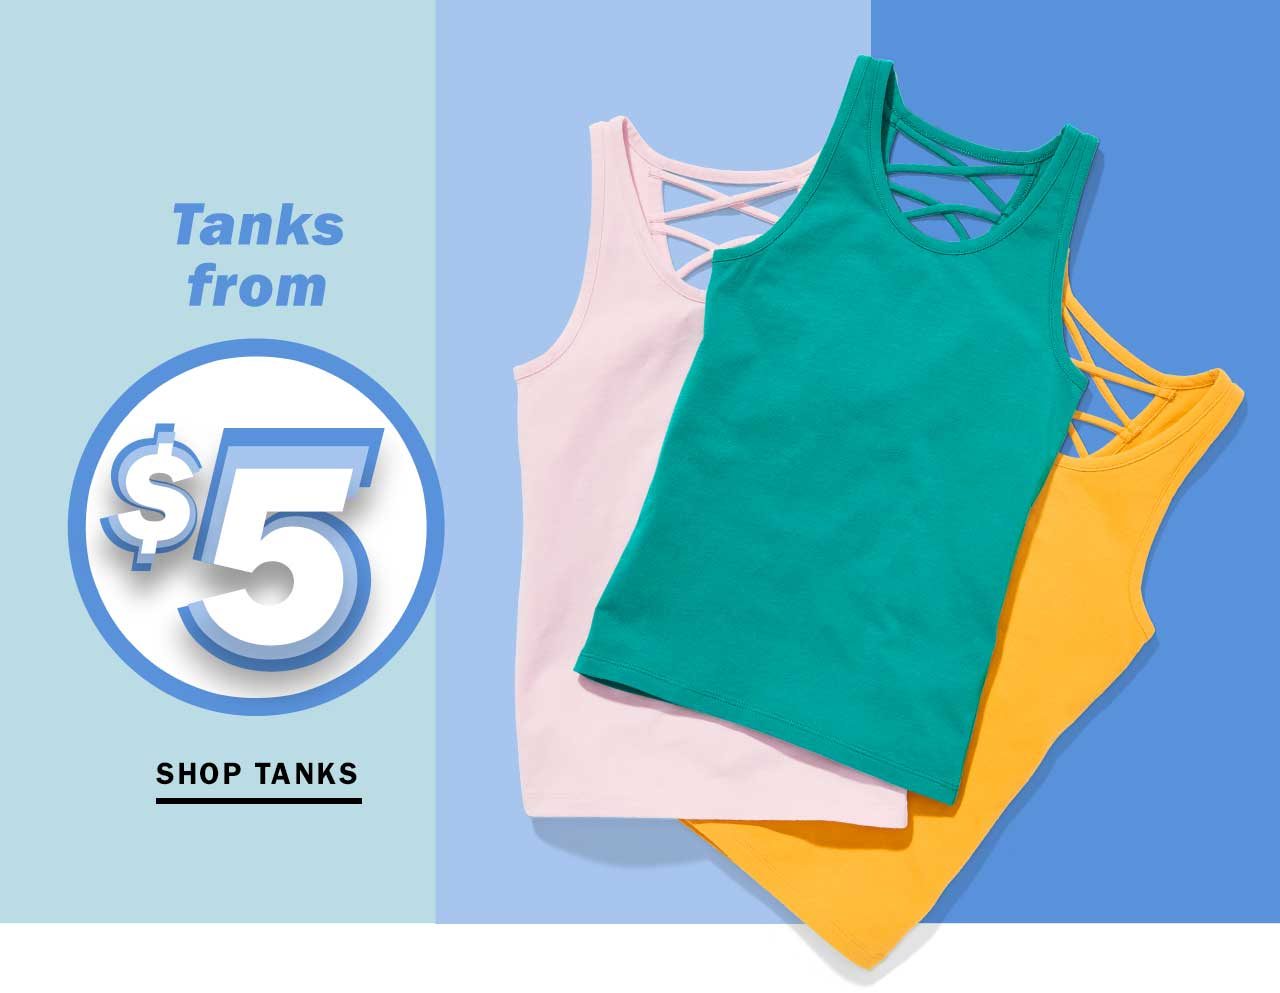 Tanks from $5